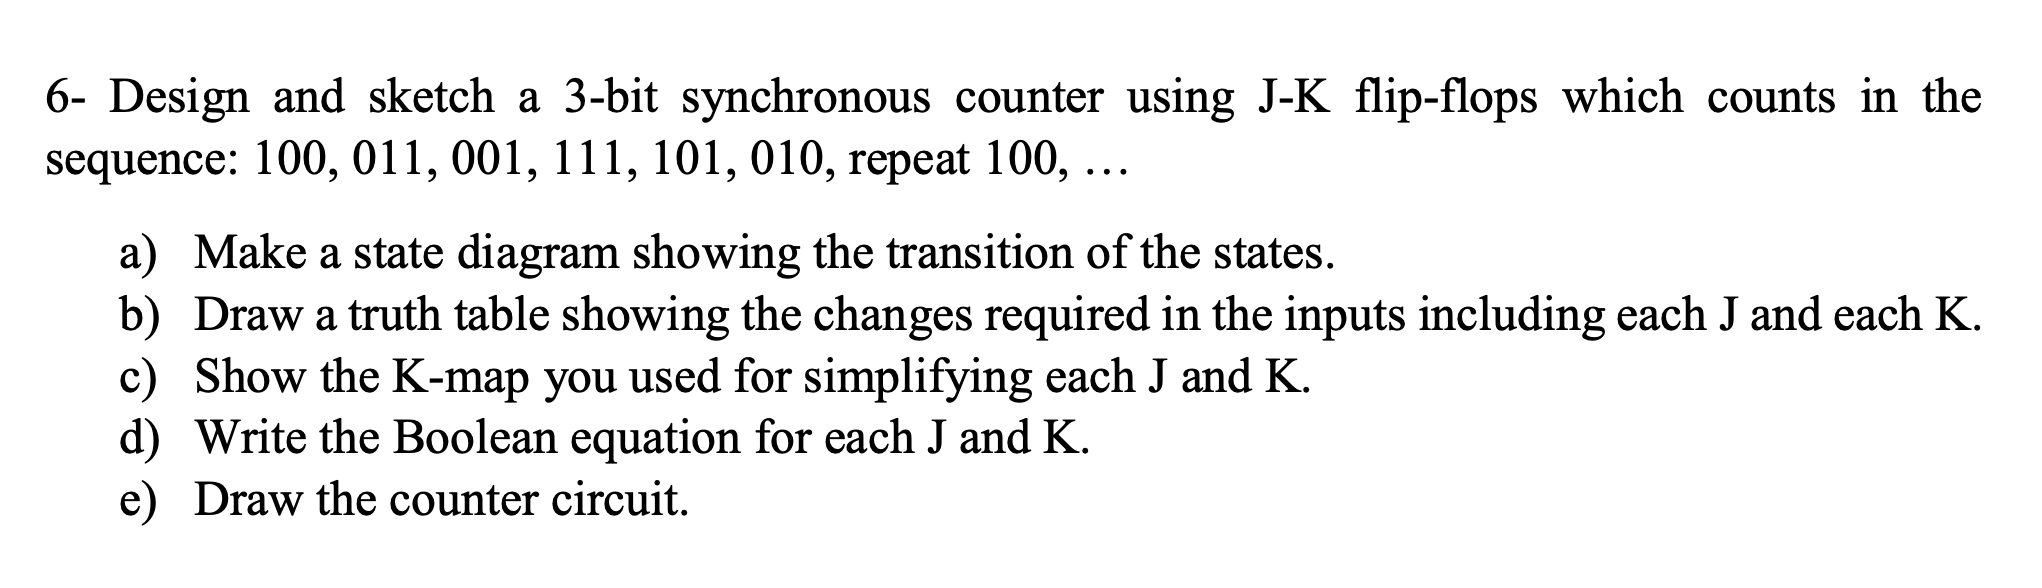 6- Design and sketch a 3-bit synchronous counter using J-K flip-flops which counts in the
sequence: 100, 011, 001, 111, 101, 010, repeat 100, ...
a) Make a state diagram showing the transition of the states.
b) Draw a truth table showing the changes required in the inputs including each J and each K.
c) Show the K-map you used for simplifying each J and K.
d) Write the Boolean equation for each J and K.
e) Draw the counter circuit.
